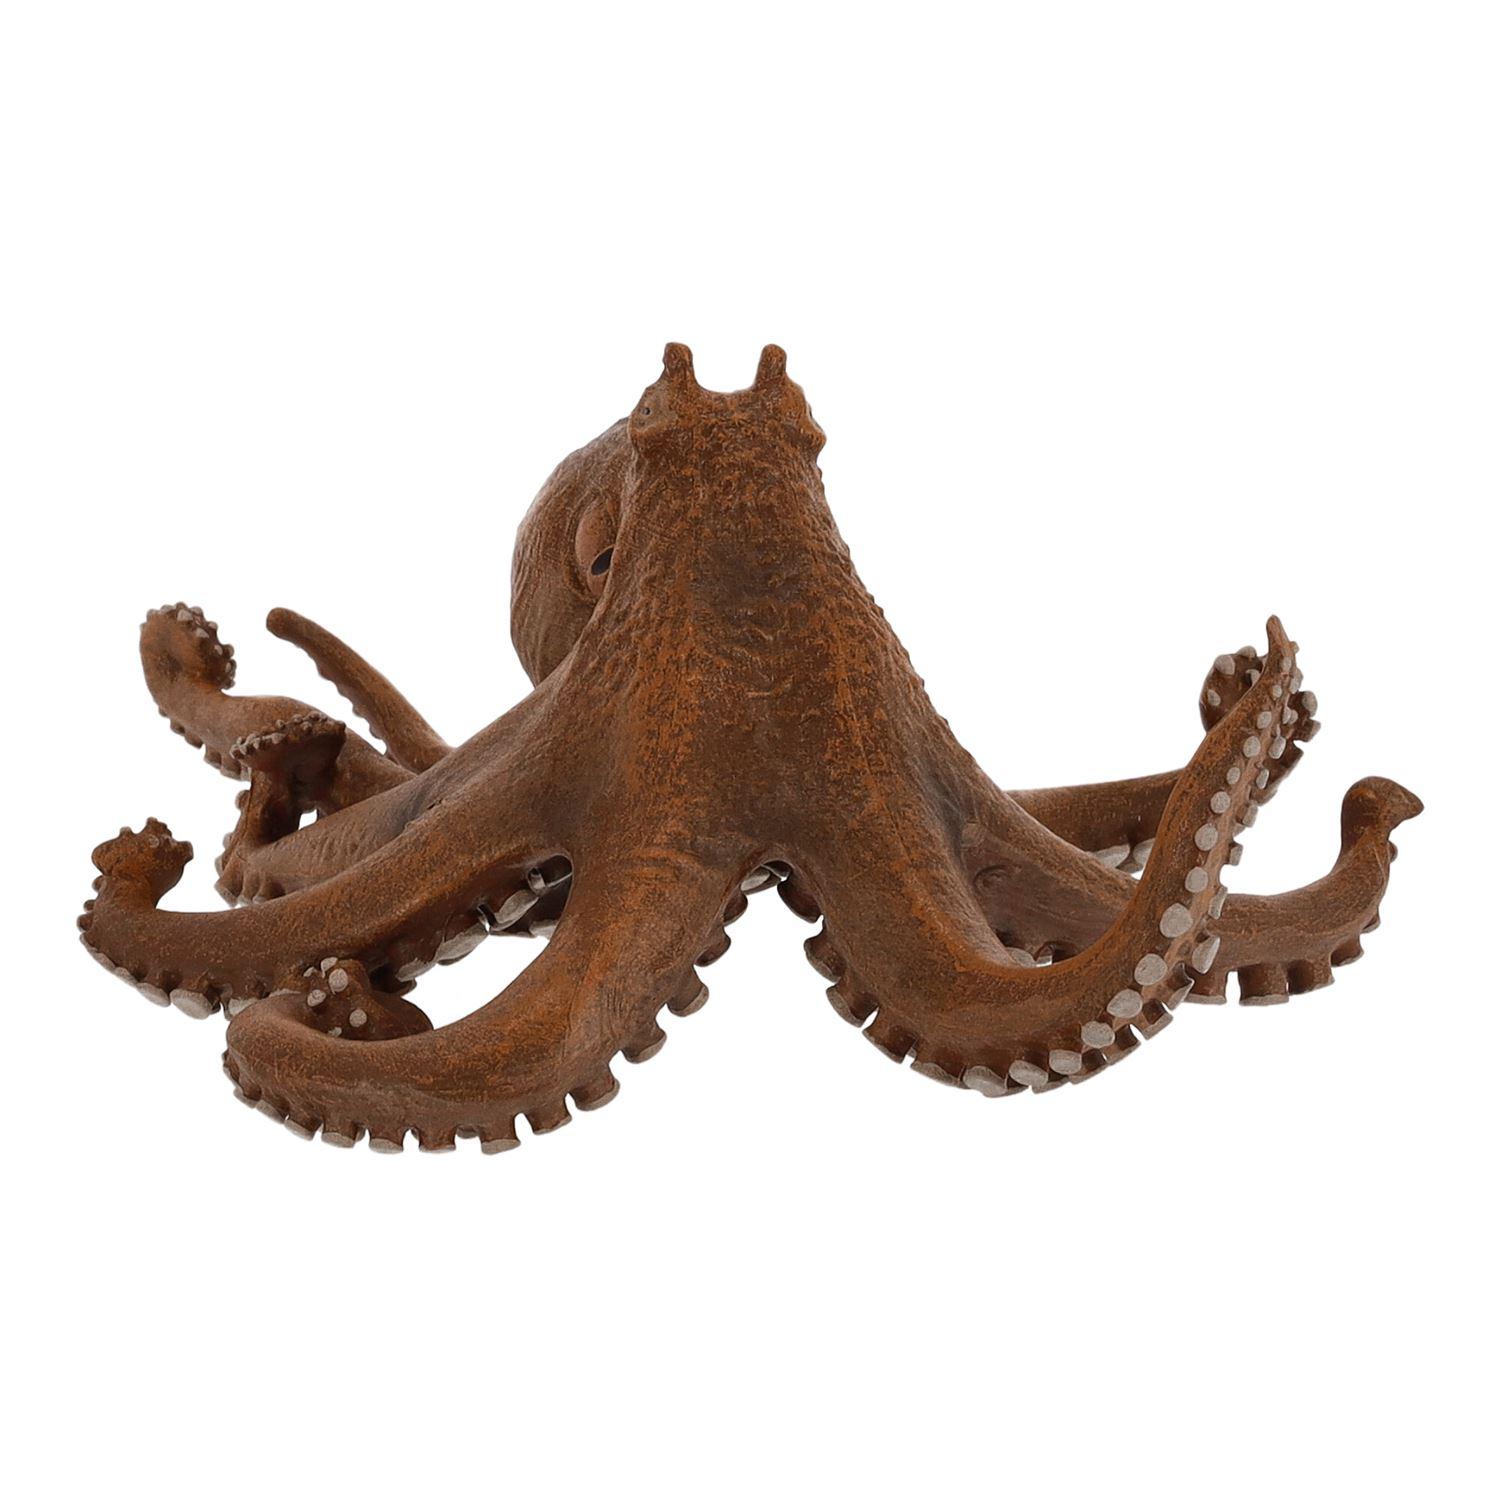 Collectible figurine Octopus, Papo